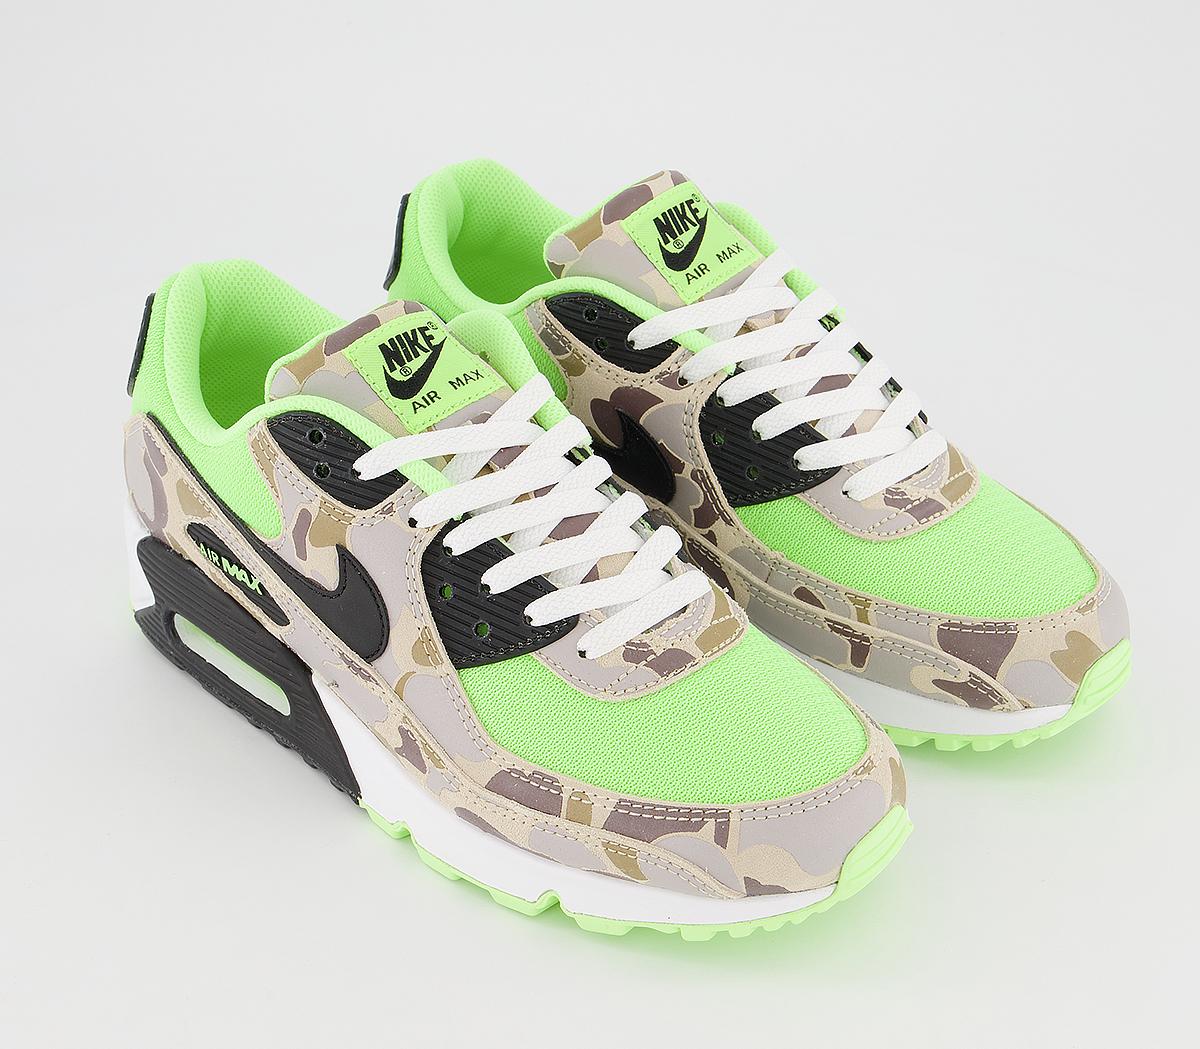 Nike Air Max 90 Trainers Ghost Green Black - His trainers